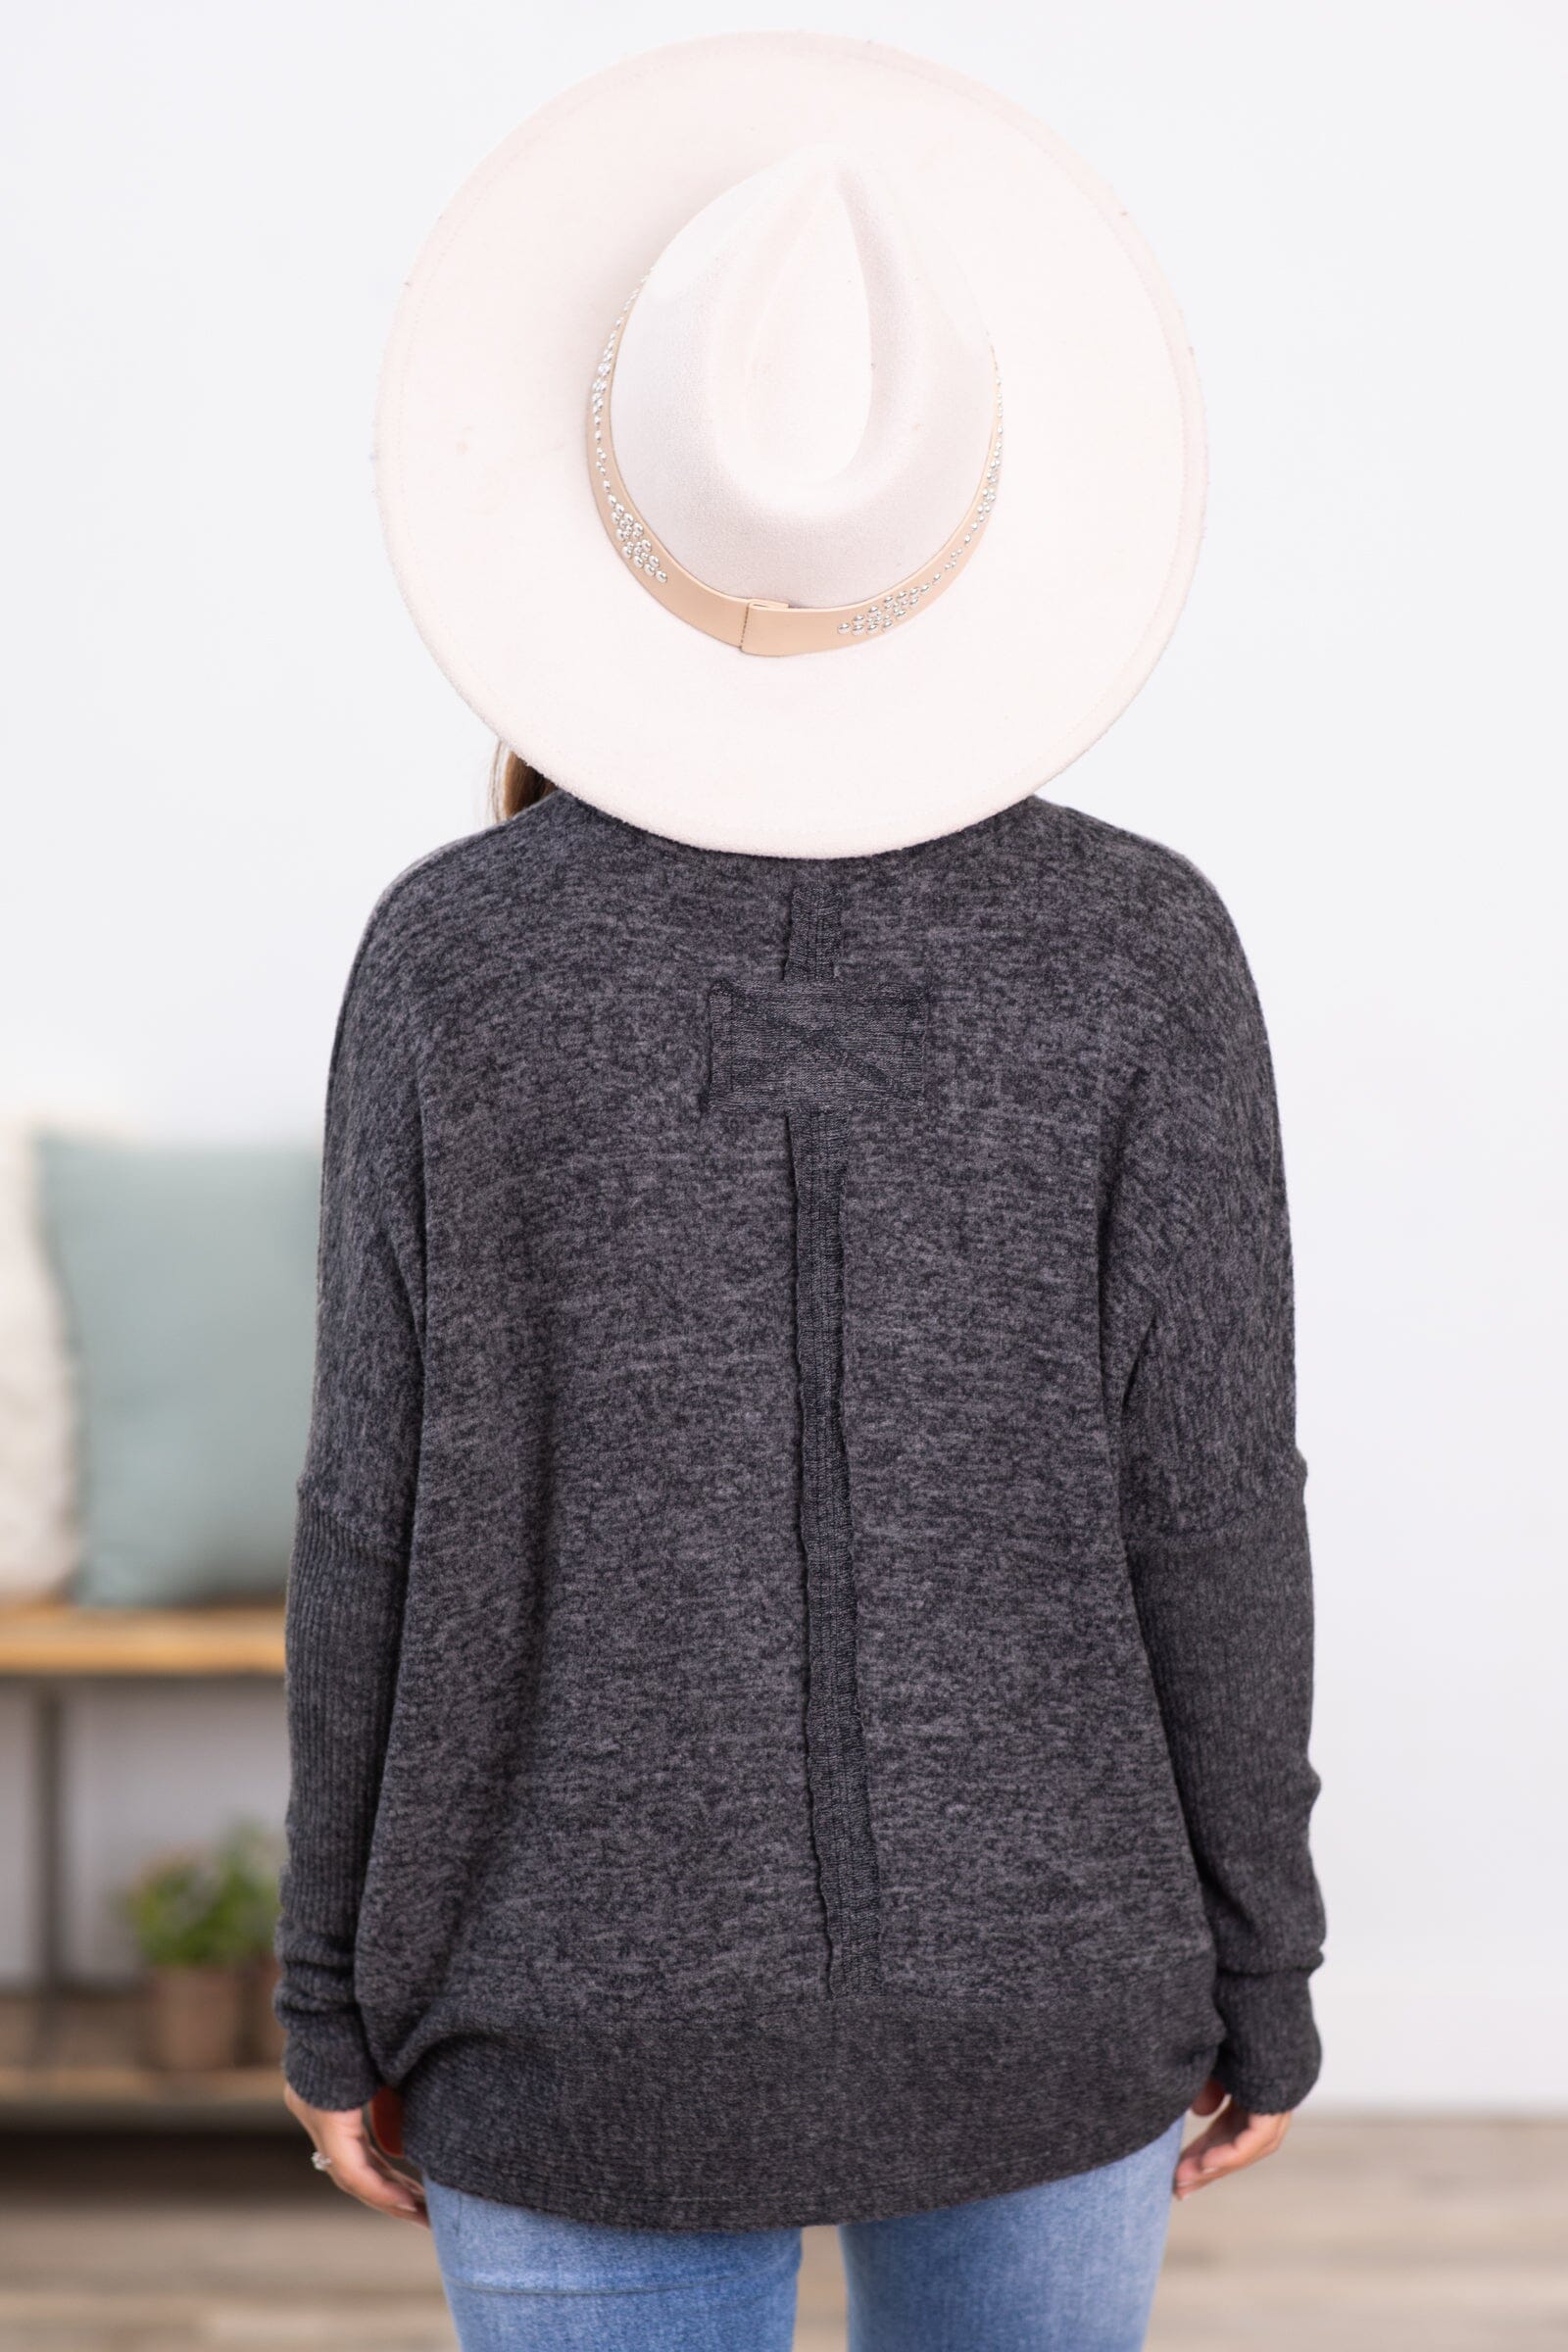 Charcoal Melange Hacci Knit Dolman Sleeve Top - Filly Flair